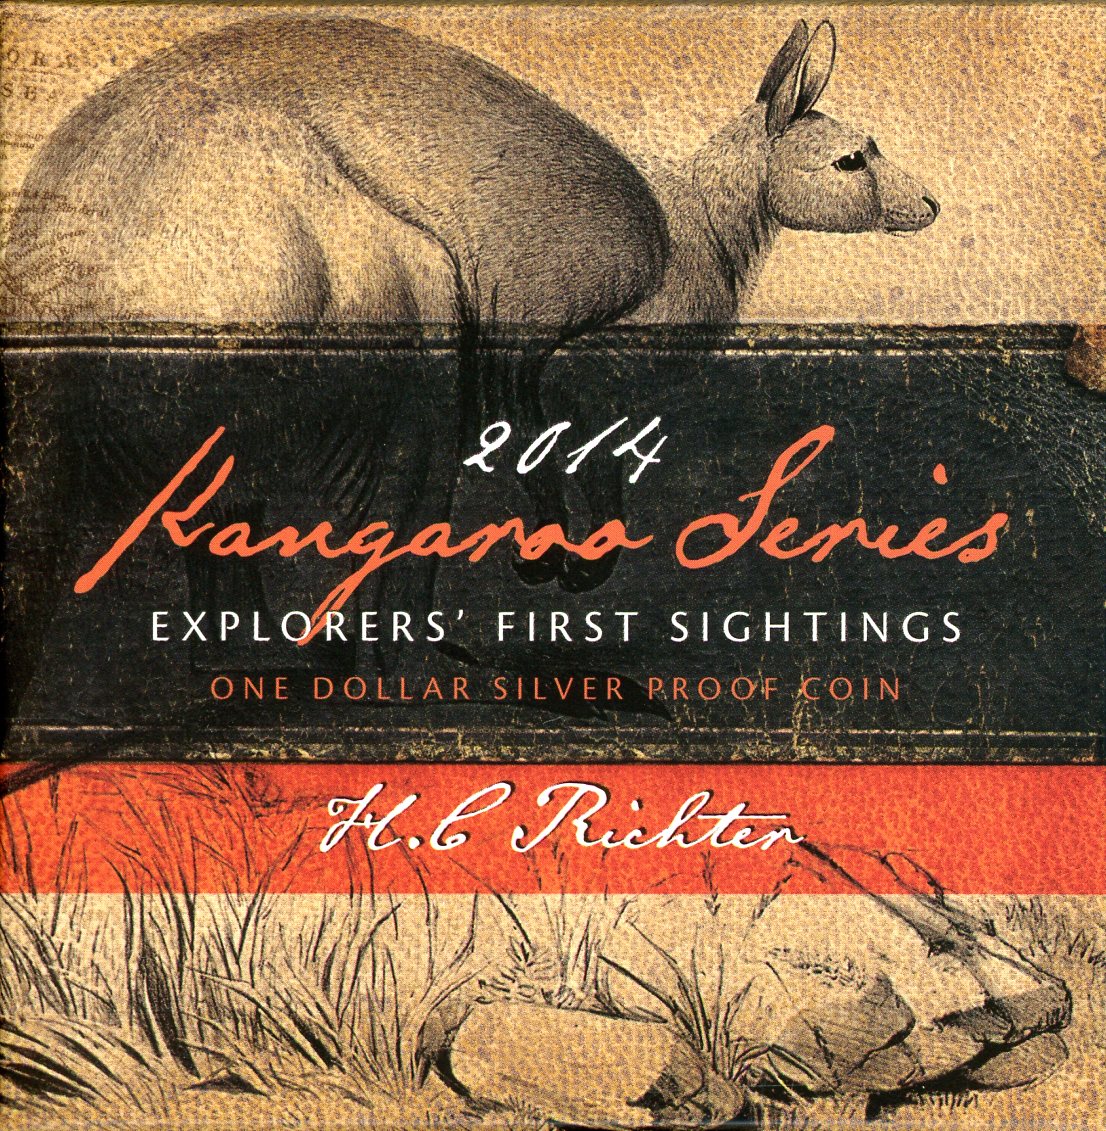 Thumbnail for 2014 Kanga Series Explorer's First Sightings $1 Silver Proof Coin